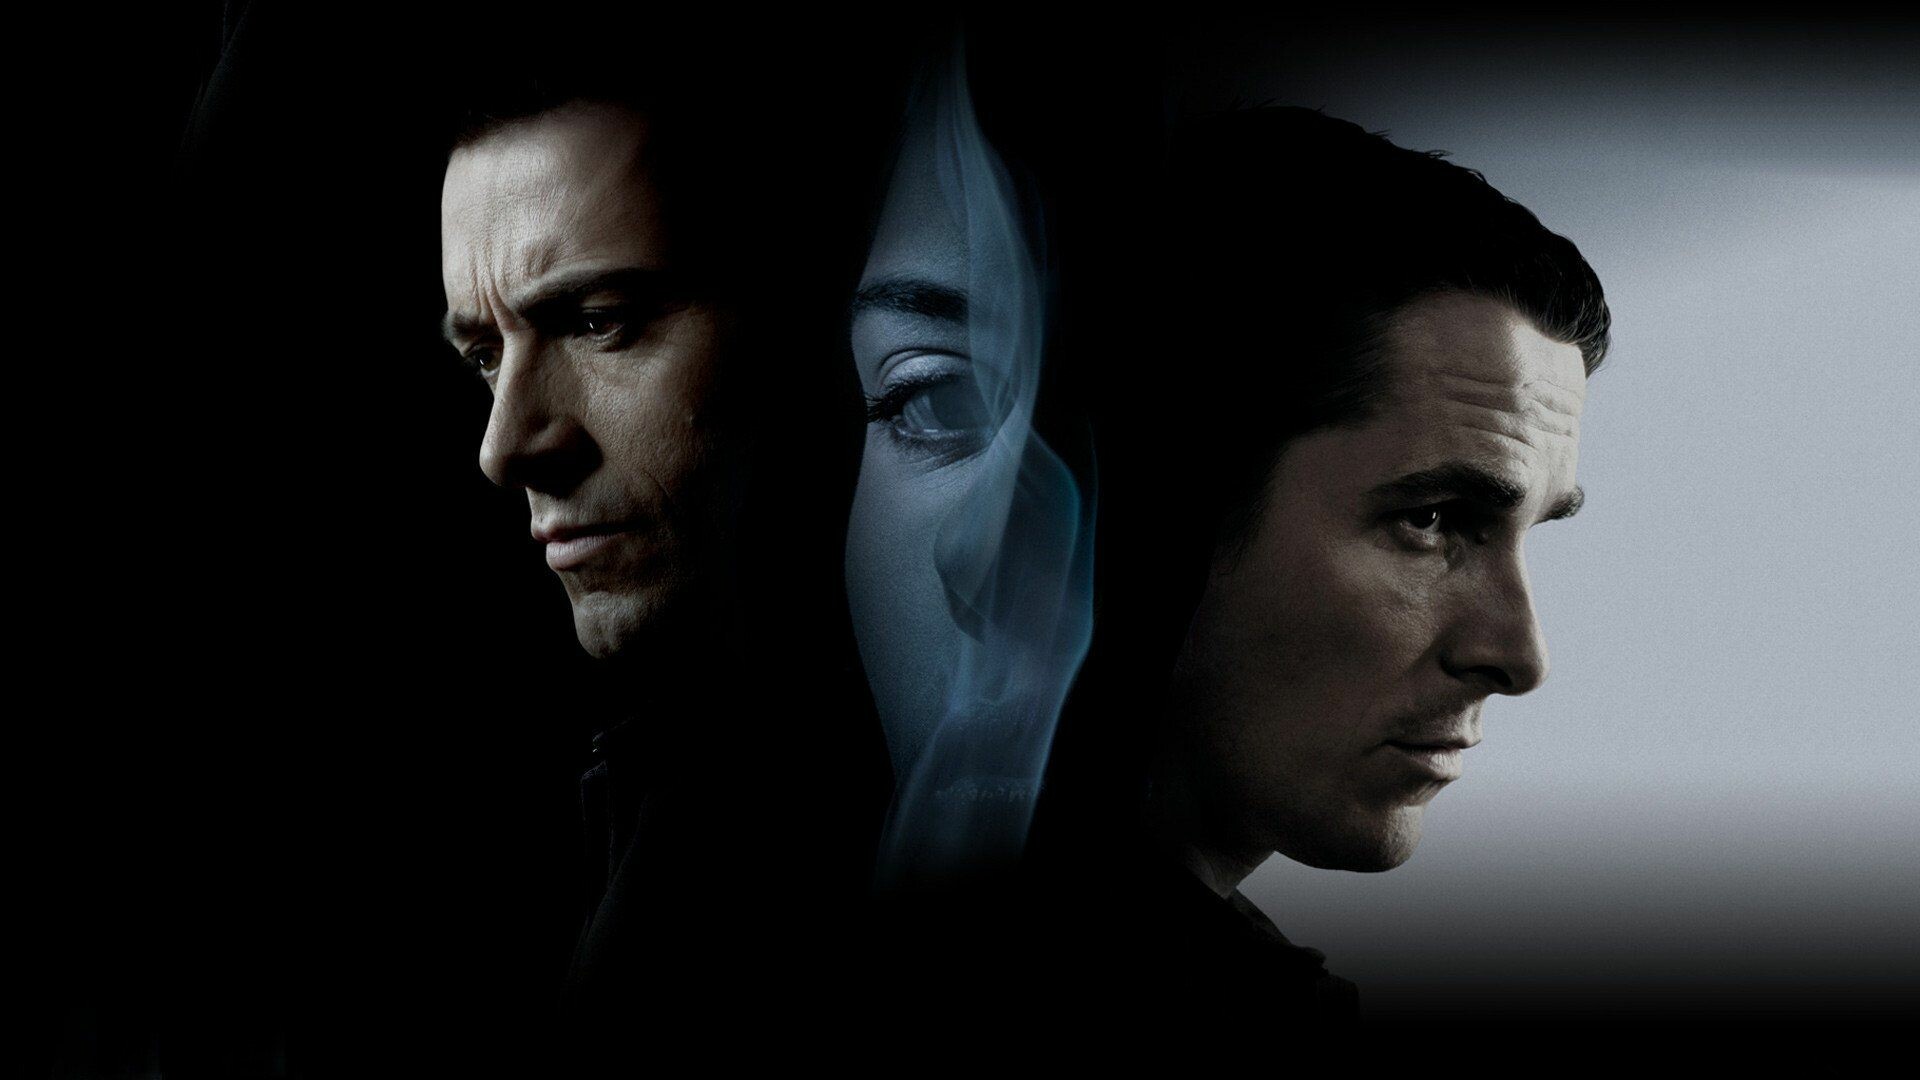 The Prestige: The film reunites Nolan with actors Bale and Caine from Batman Begins. 1920x1080 Full HD Background.